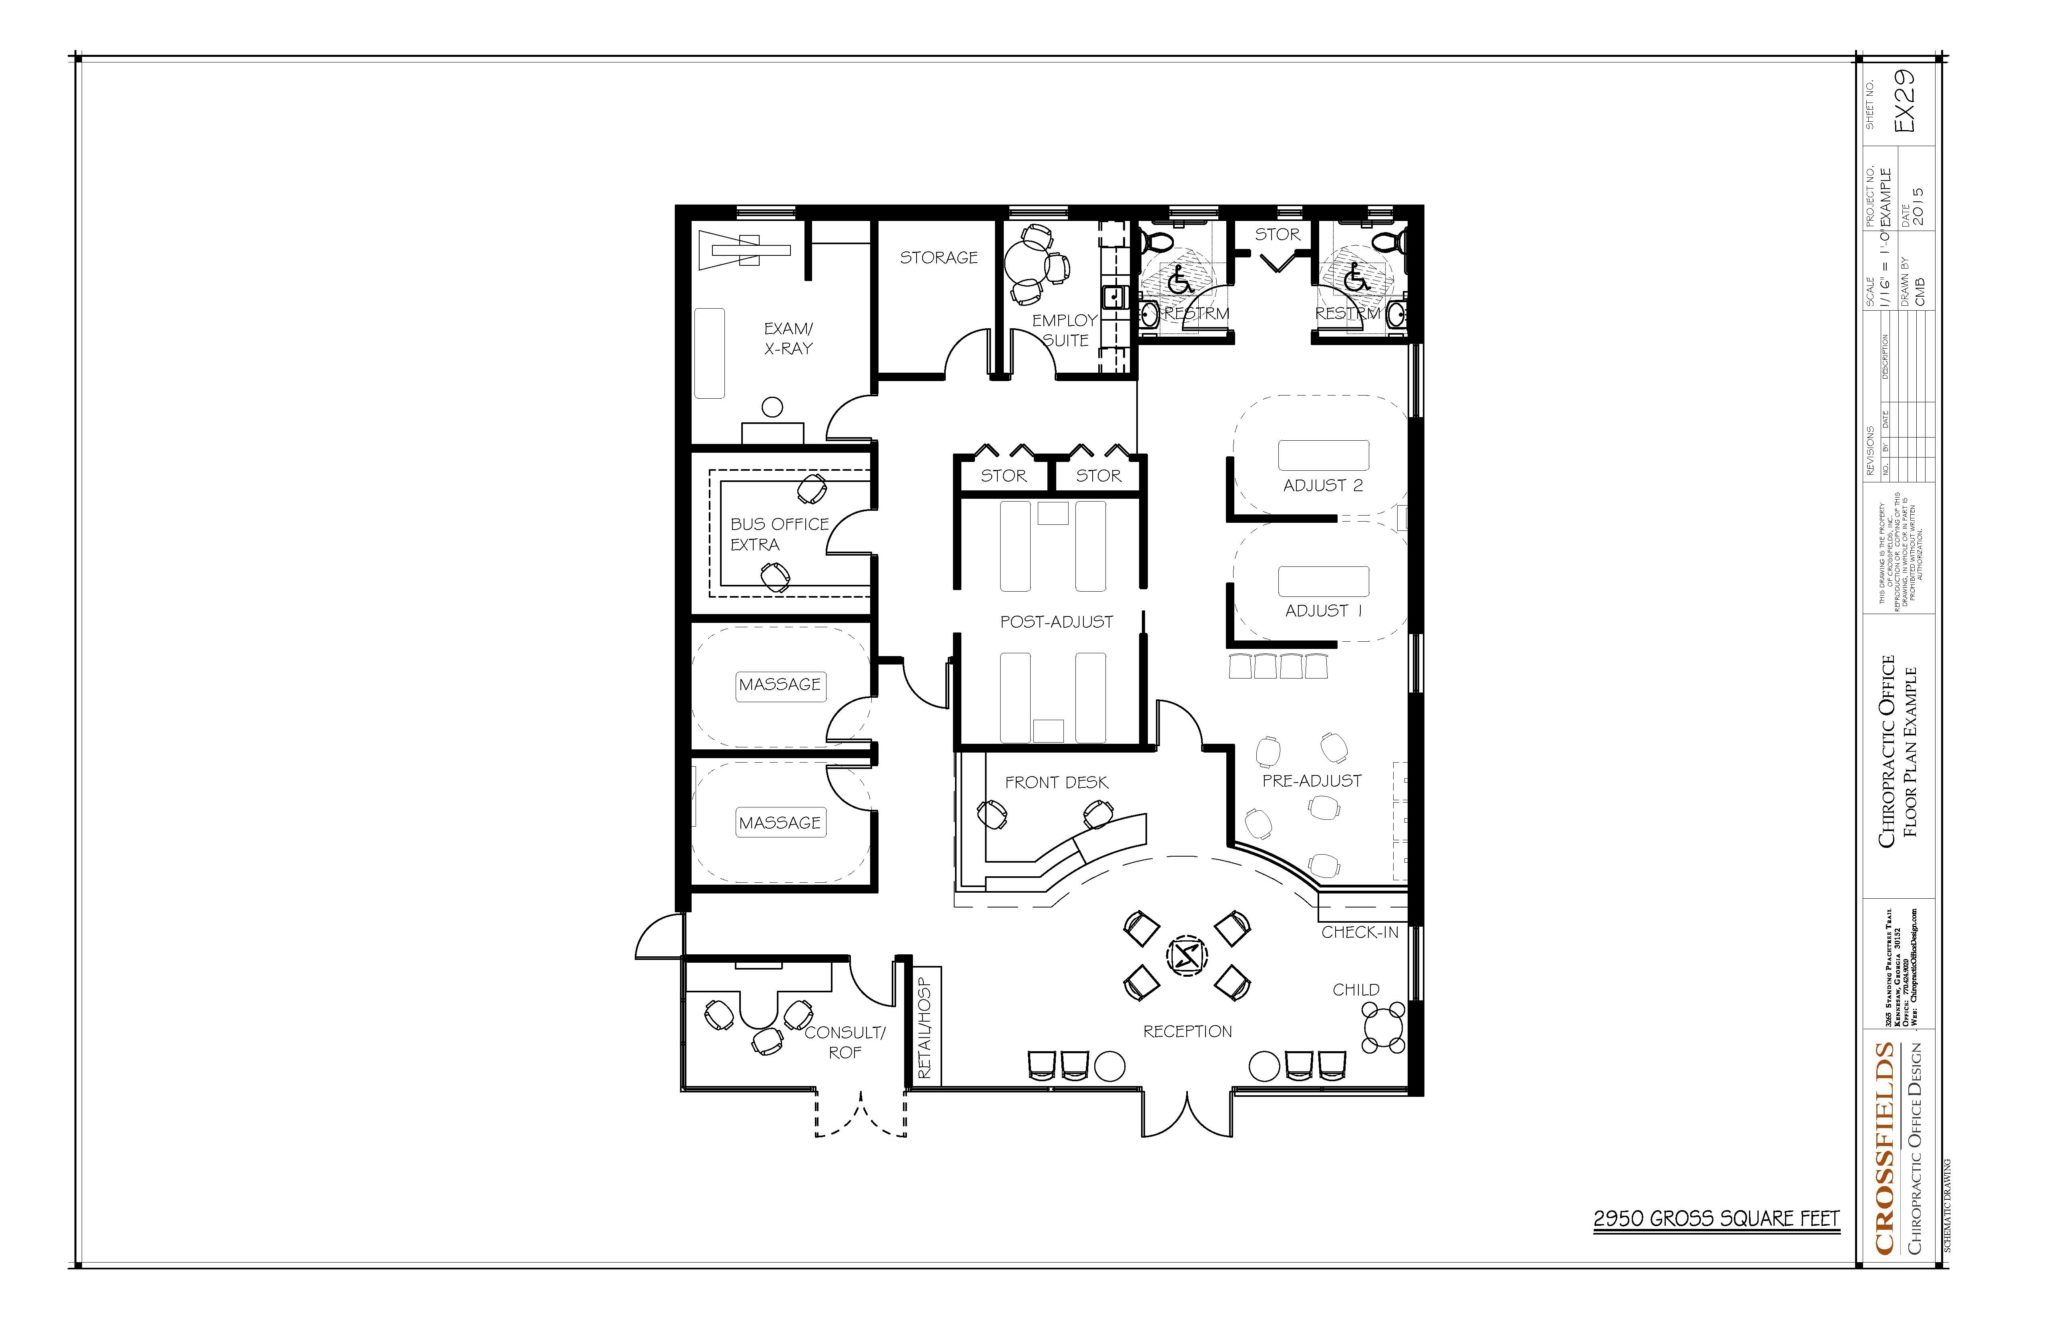 chiropractic-floor-plan-with-massage-and-pre-adjusting-and-massage-2950-gross-sq-ft-ex29-2048x1321-chiropractic-office-layout